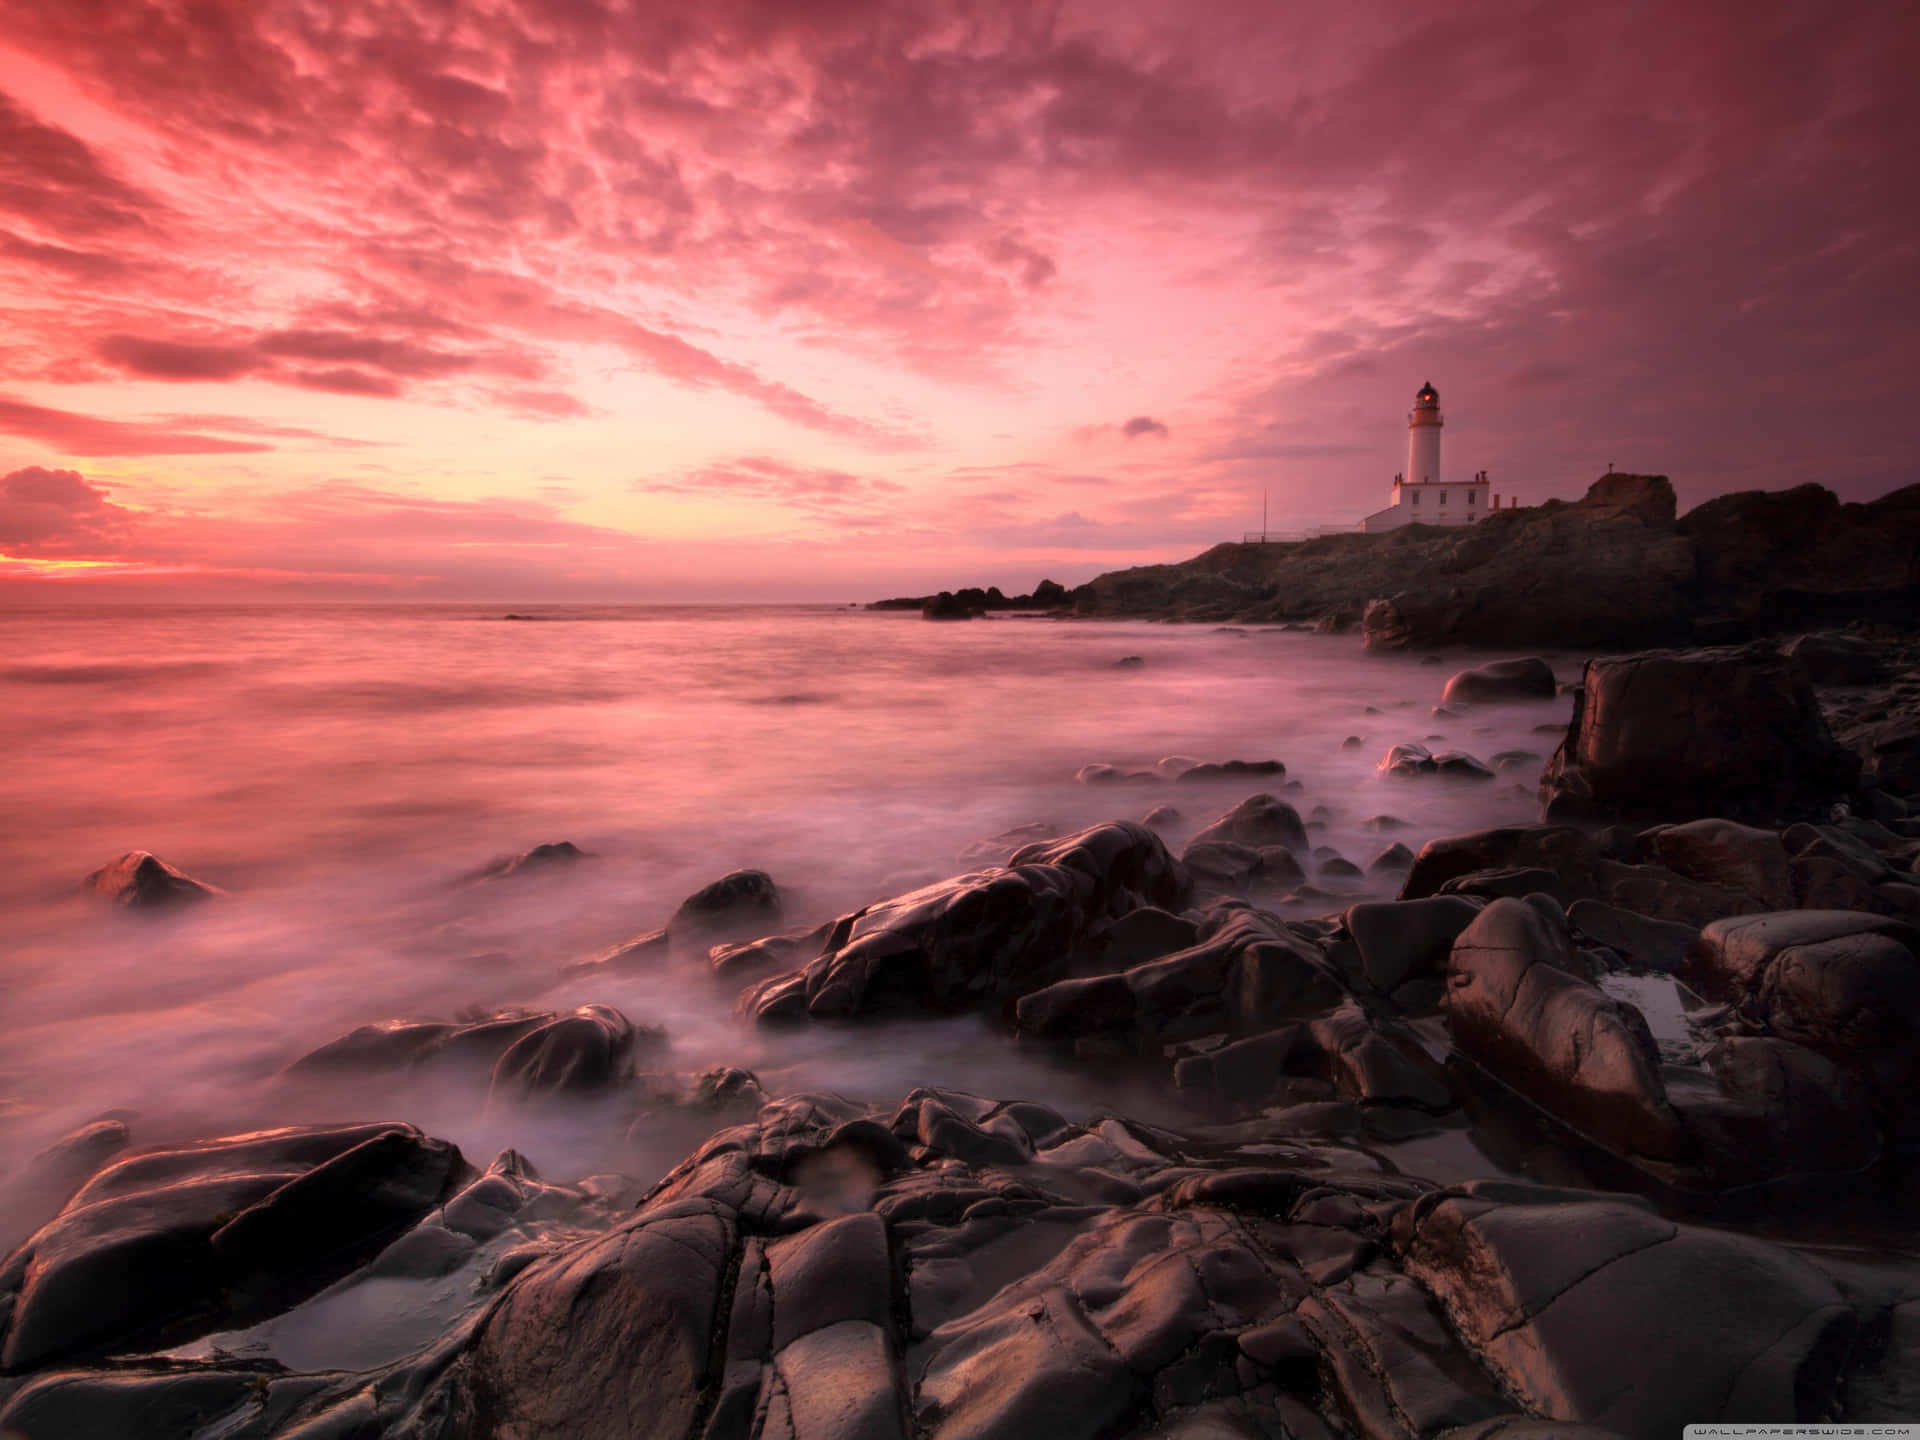 "Beautiful pink hues take over the sky at sunset, painting the landscape of the beach." Wallpaper